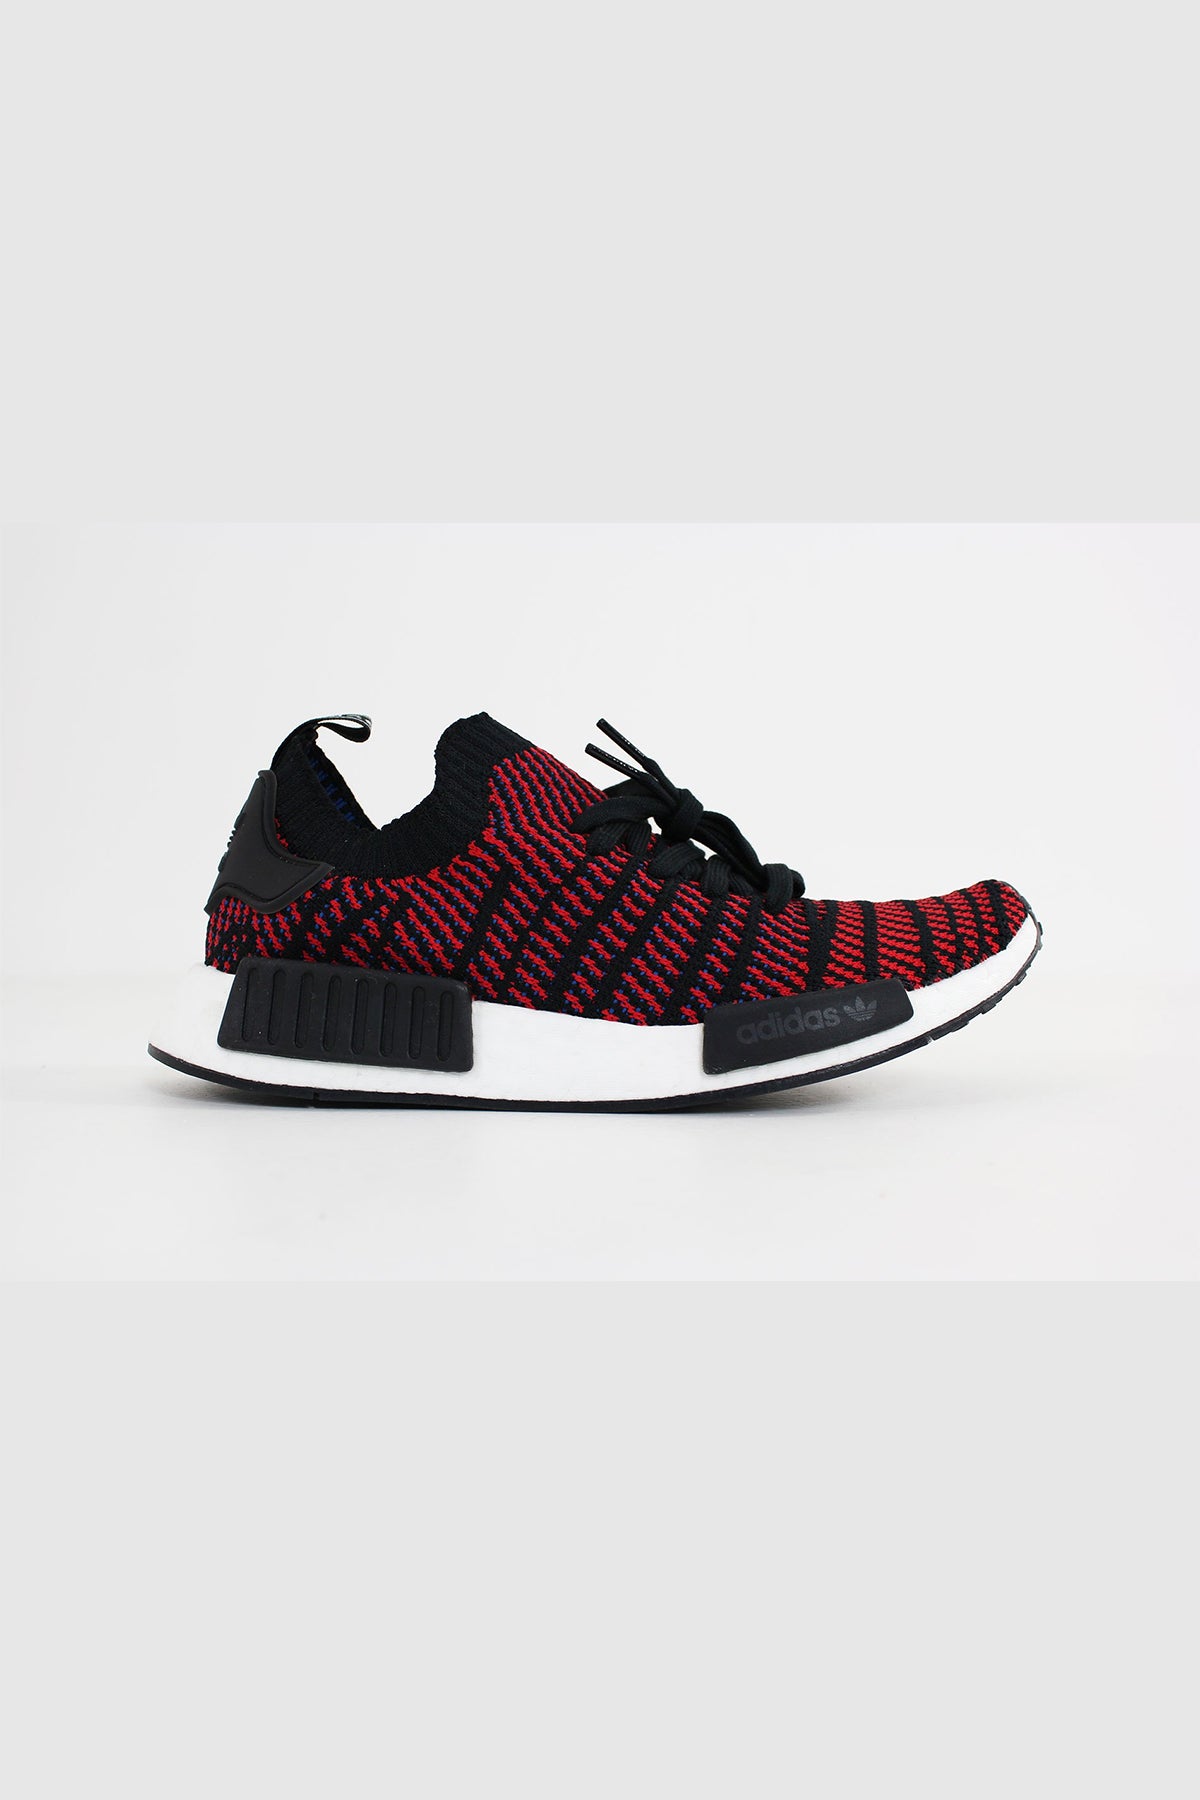 nmd bordeaux rot